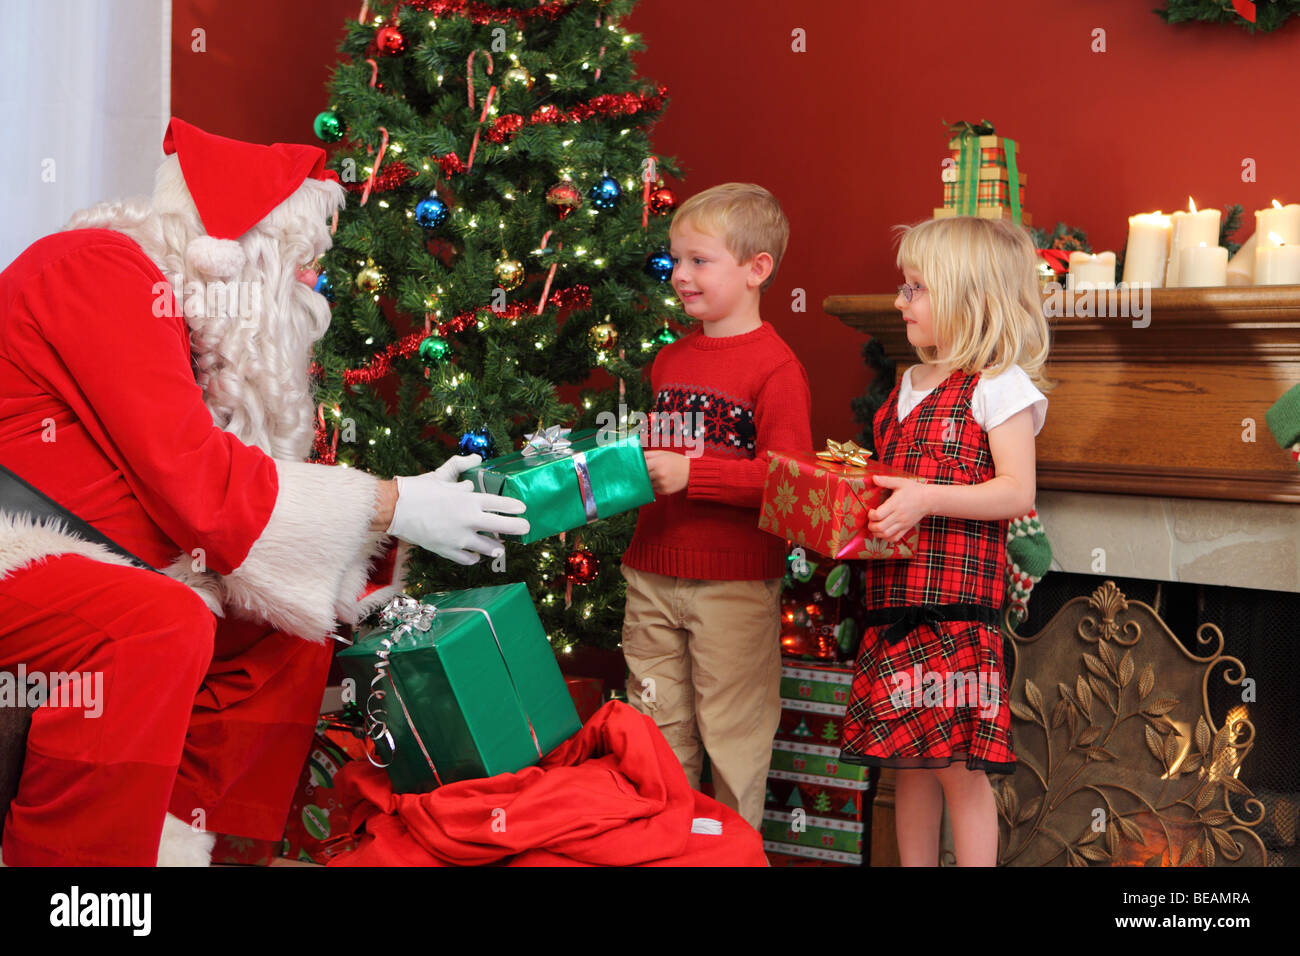 Santa Claus gives Christmas gifts to children Stock Photo